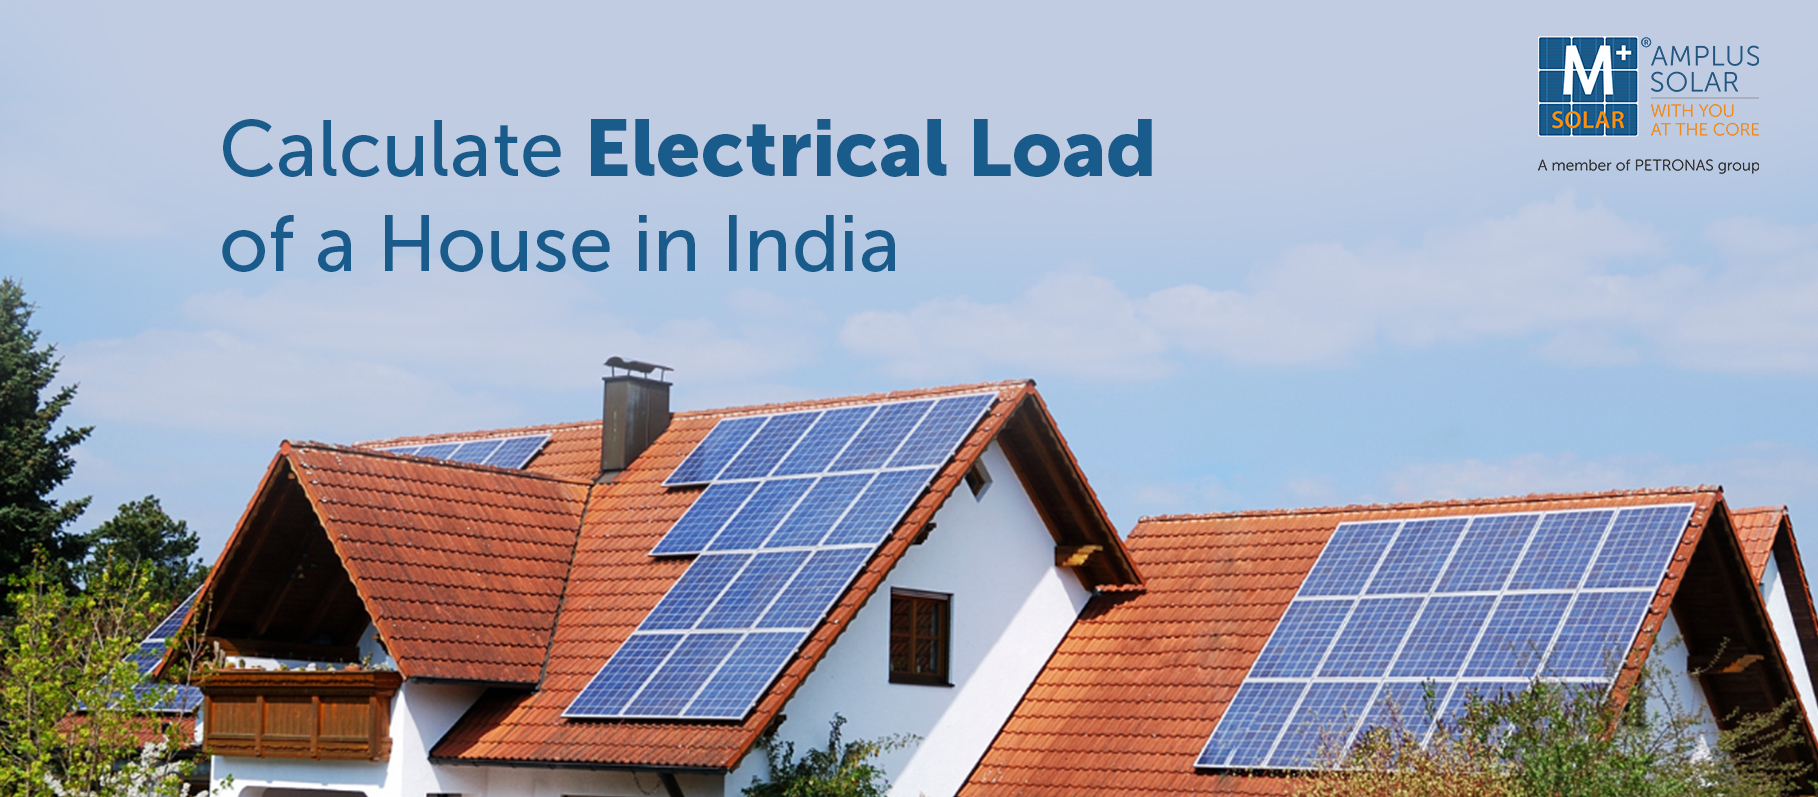 Calculate Electrical Load of a House in India